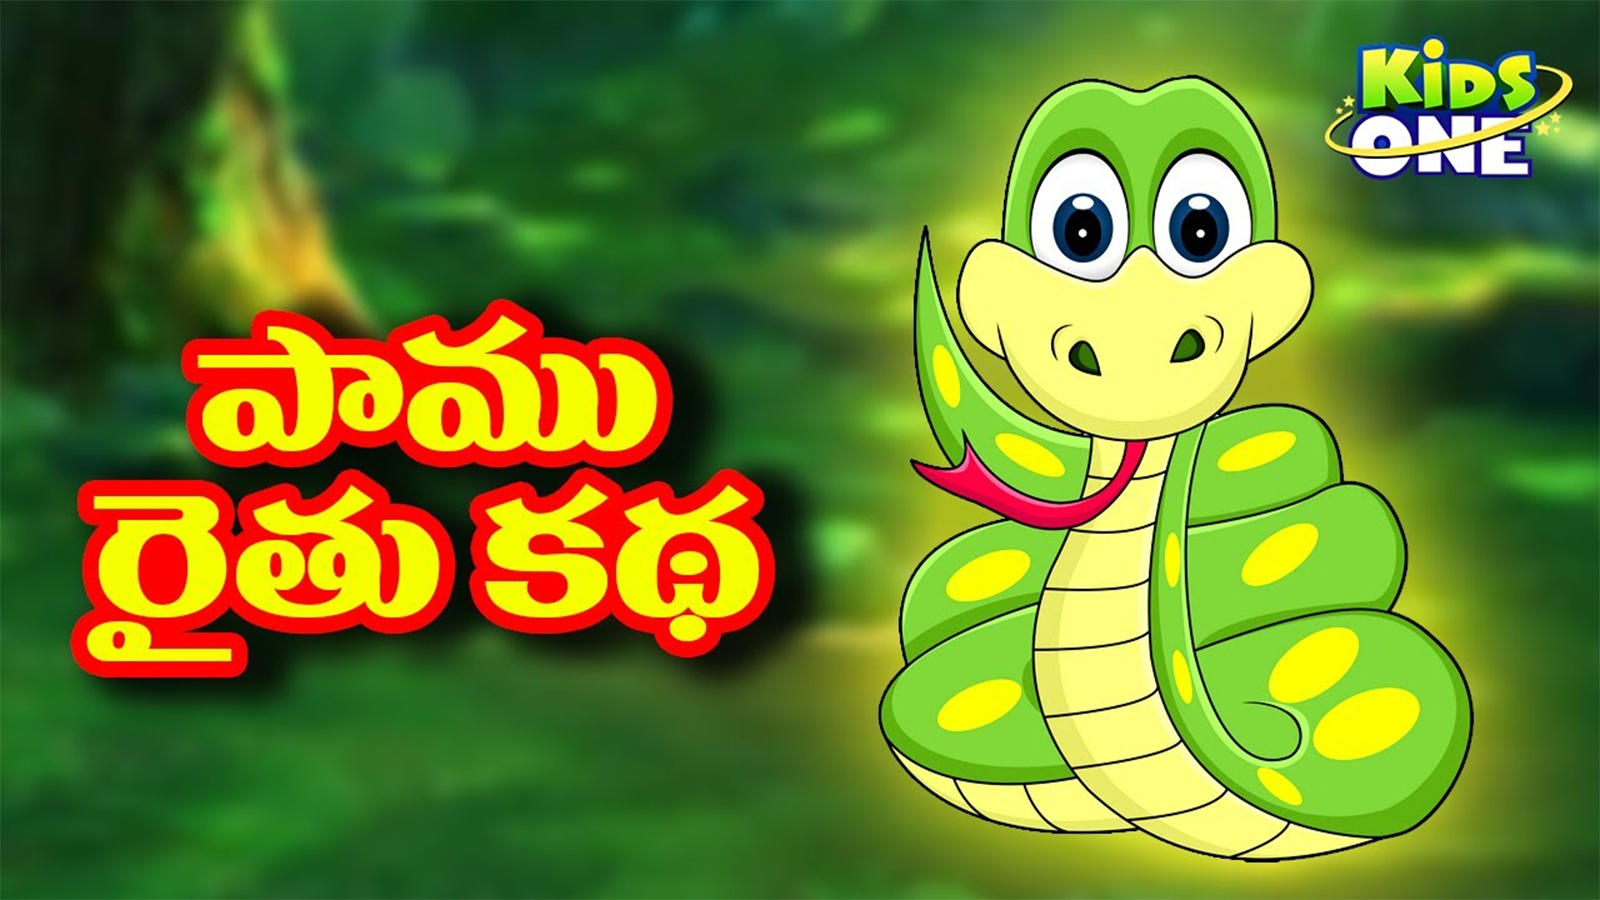 Farmer and Snake story. Snake Rhyme. About Snakes for Kids. Rhyme about Snake for Kids.